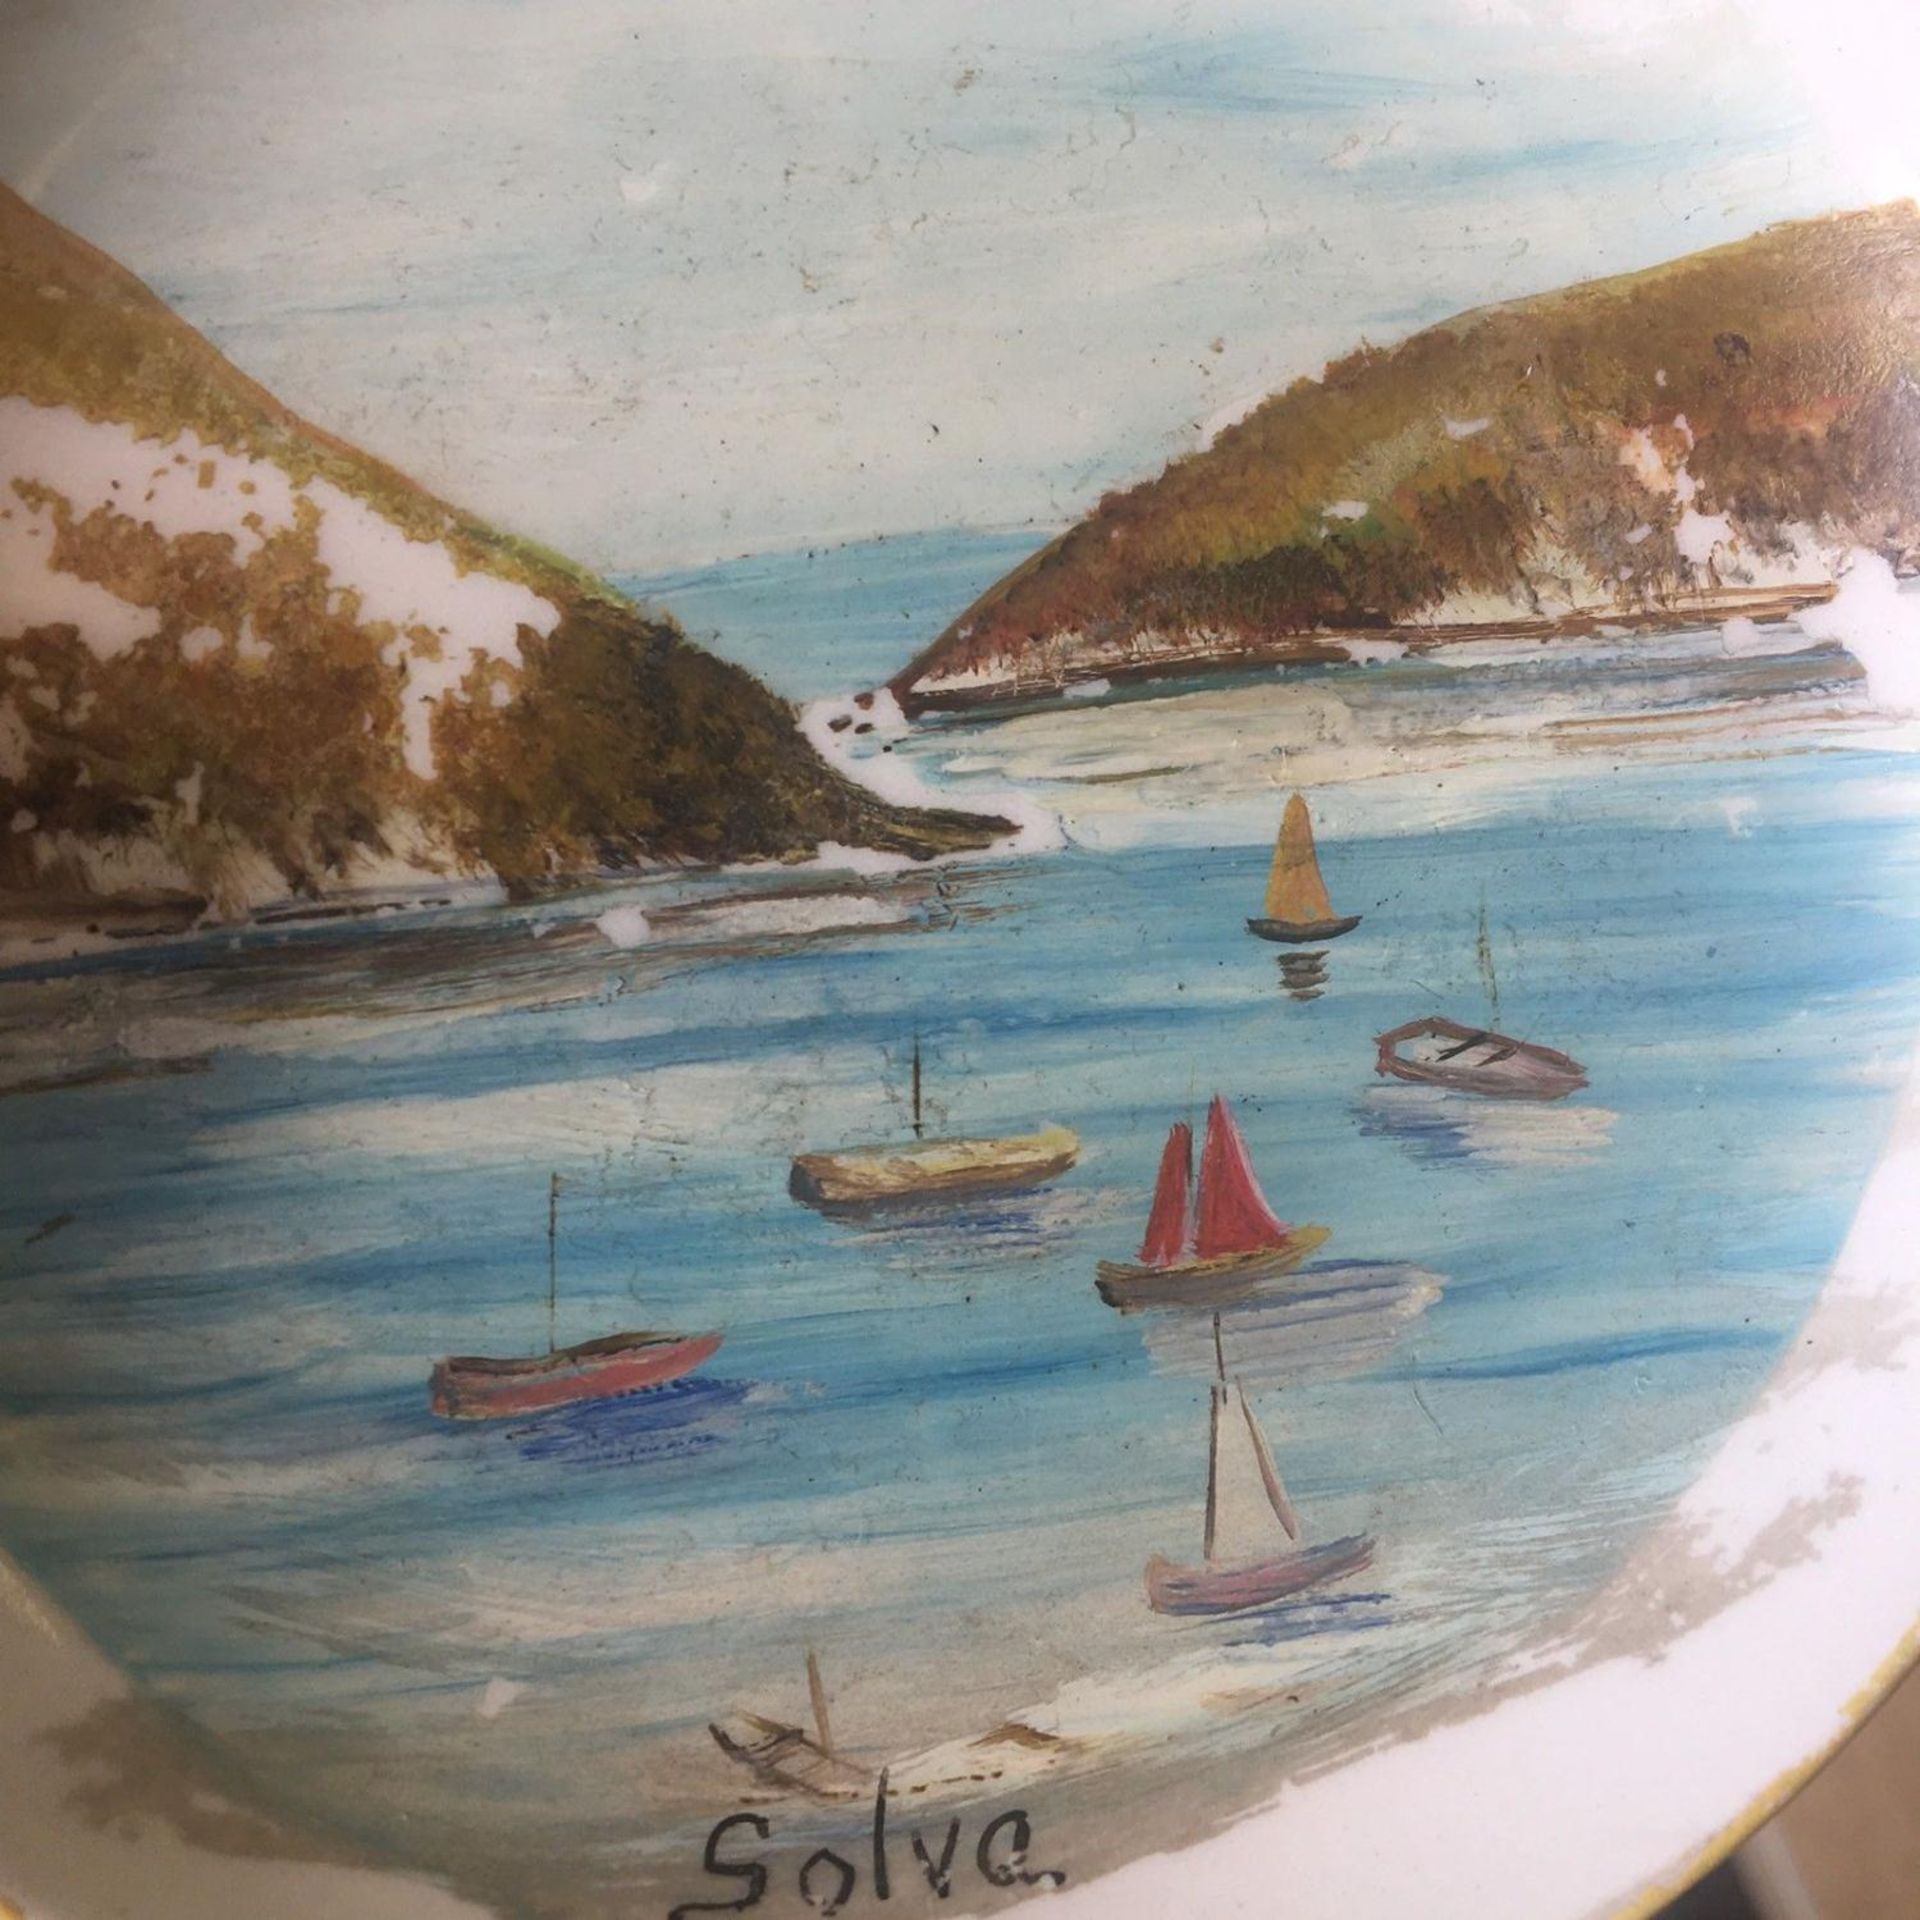 Unsigned painting of Solva Pembrokeshire Wales on a Johnson Brothers small plate - Image 4 of 4